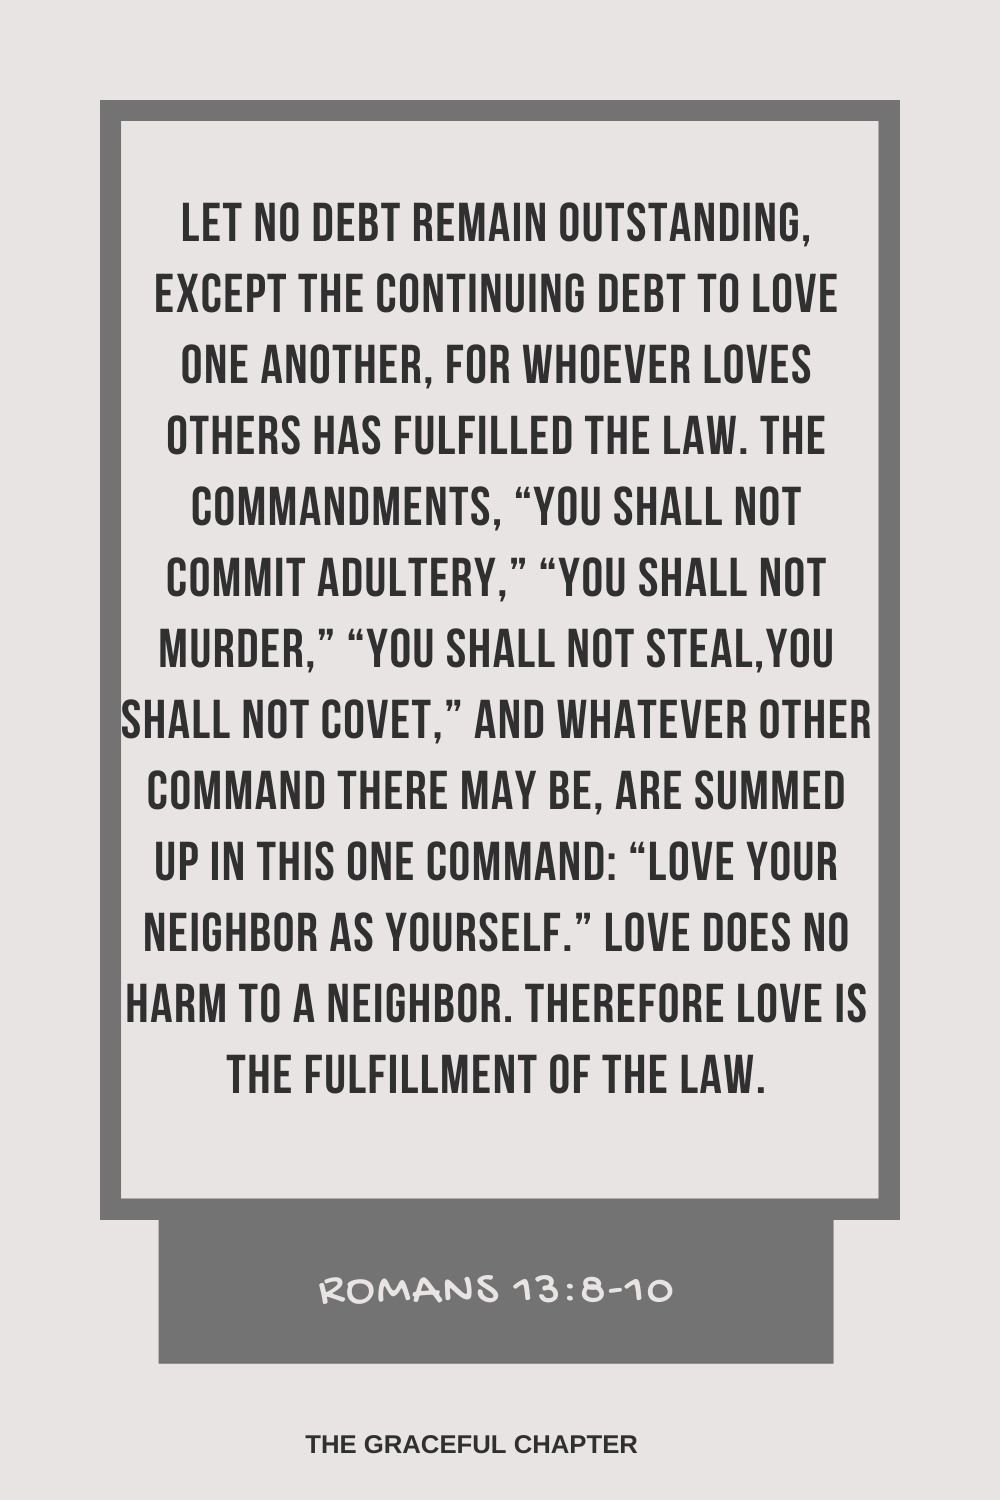 Let no debt remain outstanding, except the continuing debt to love one another, for whoever loves others has fulfilled the law. The commandments, “You shall not commit adultery,” “You shall not murder,” “You shall not steal,” “You shall not covet,” and whatever other command there may be, are summed up in this one command: “Love your neighbor as yourself.” Love does no harm to a neighbor. Therefore love is the fulfillment of the law. Romans 13:8-10